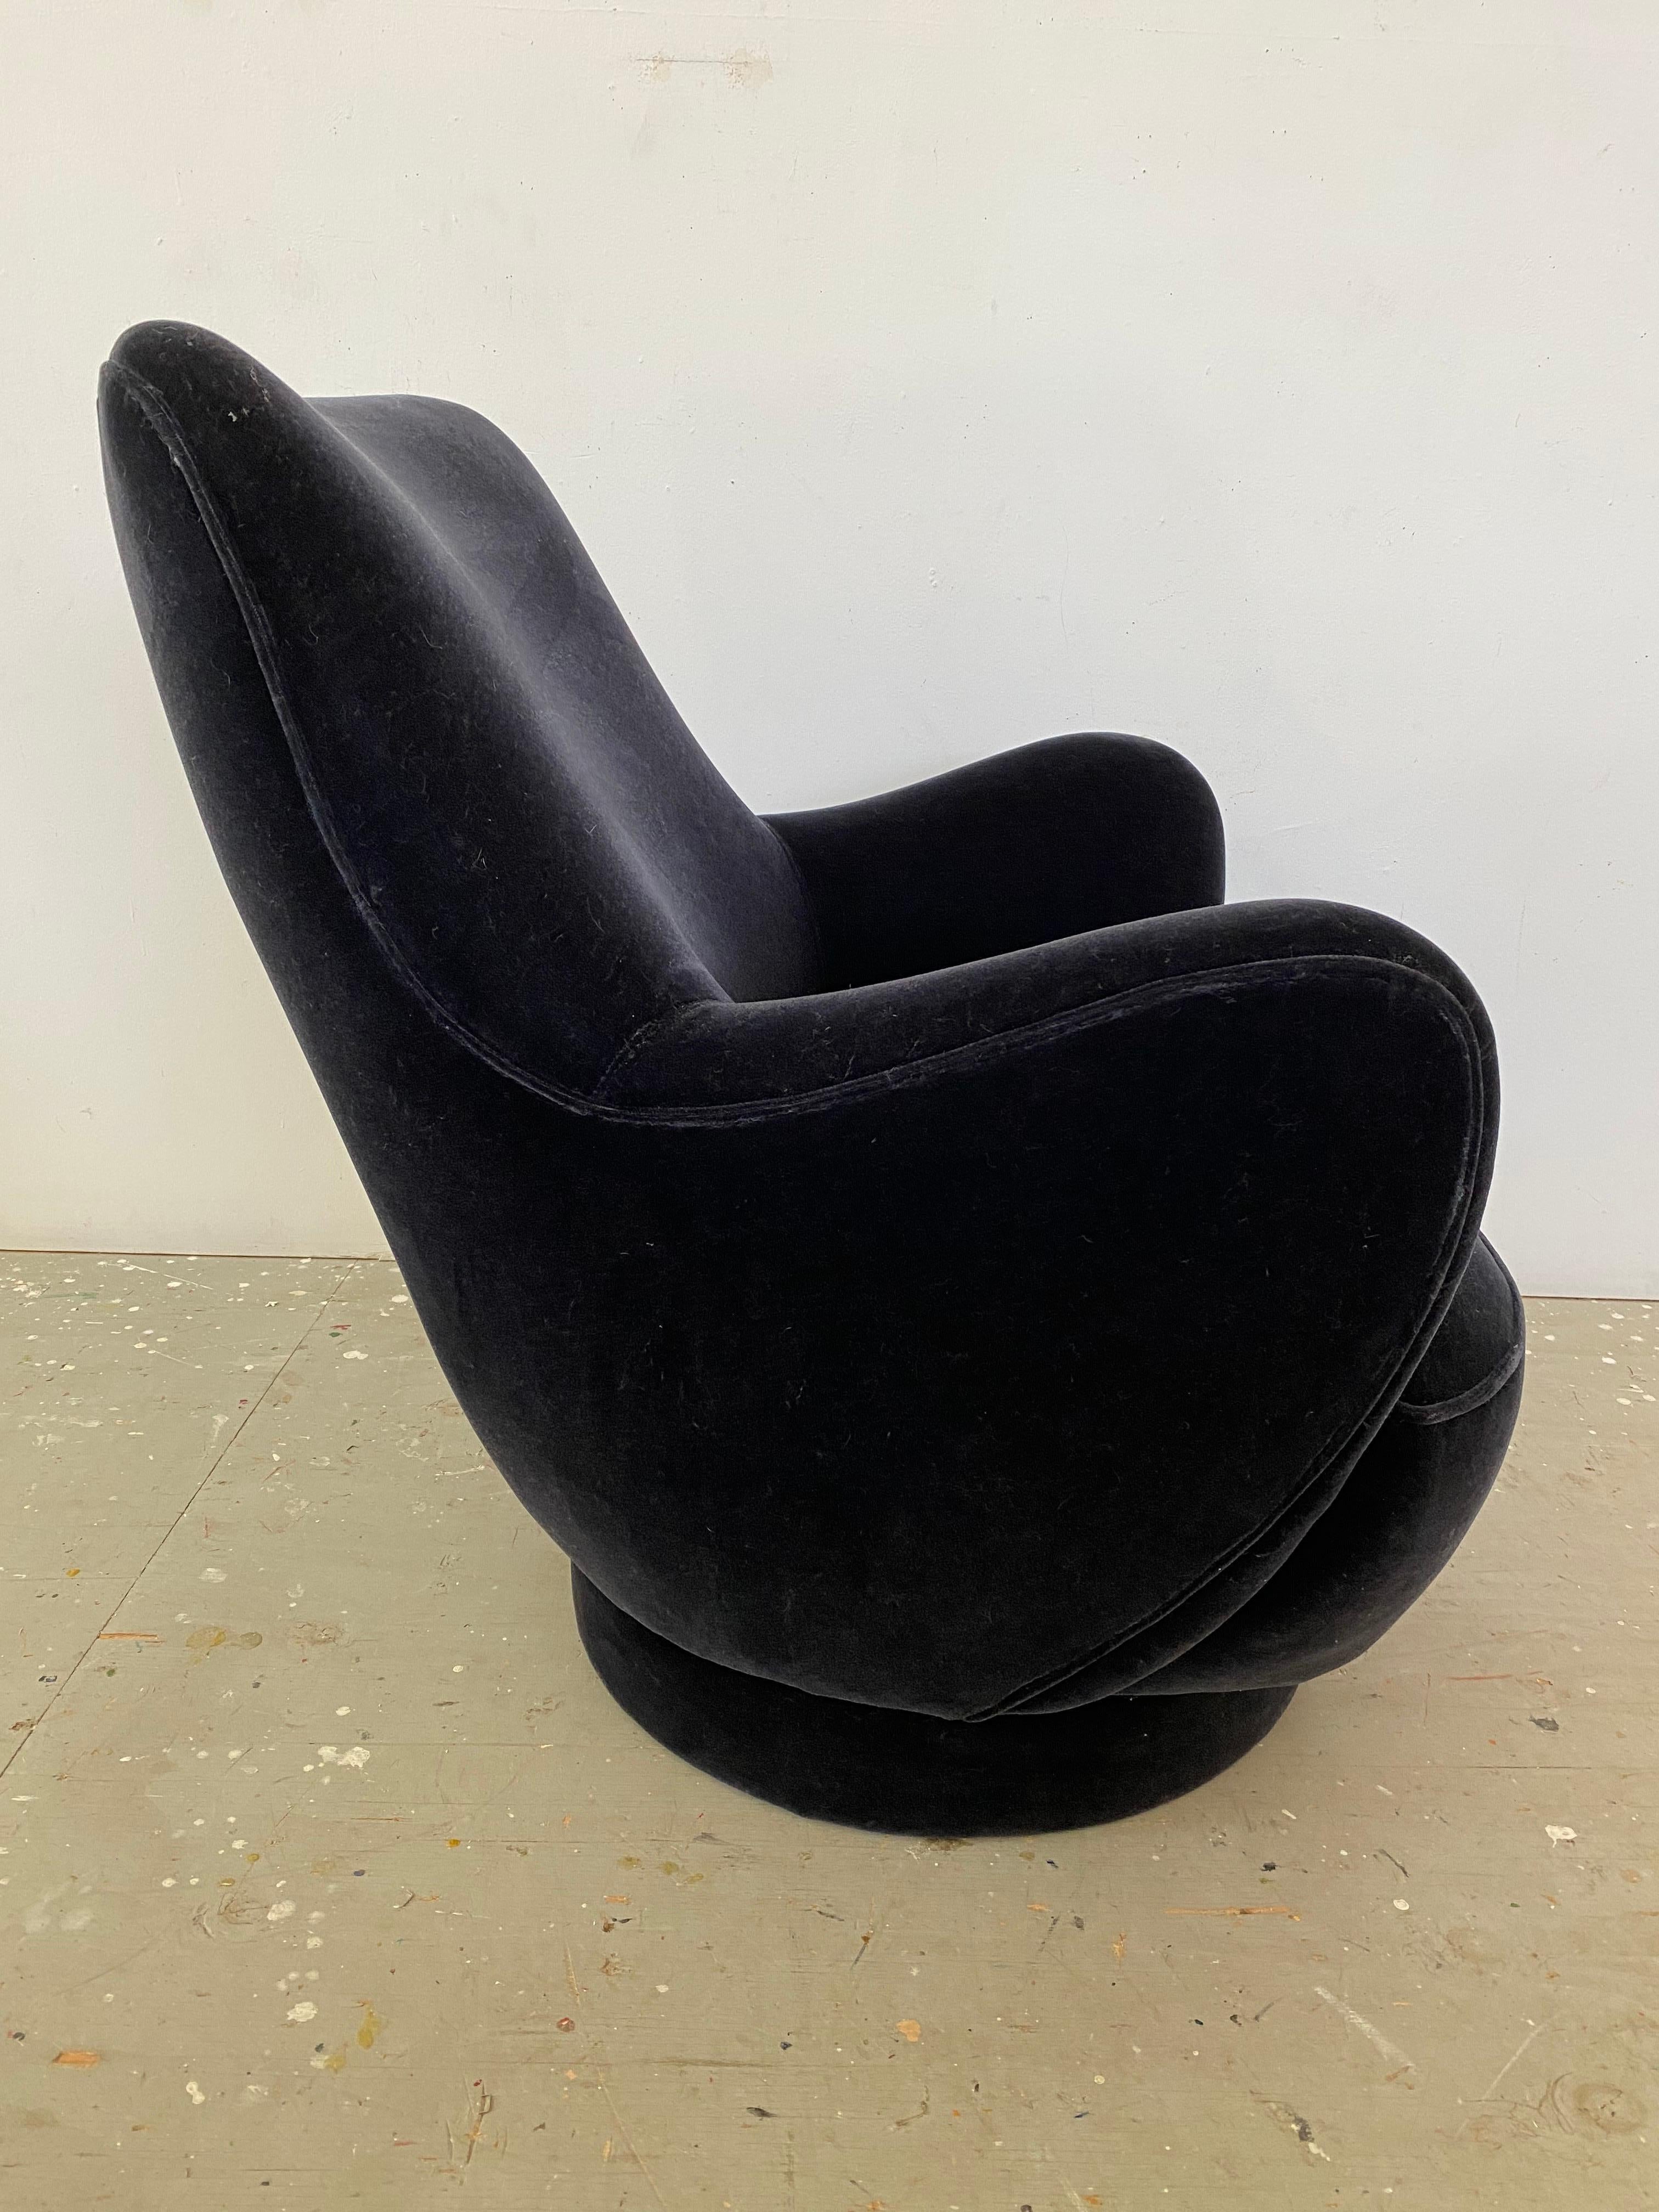 Vladimir Kagan for Directional High-Back Swivel Lounge Chair in a Charcoal Dark Blue Mohair.  One of Kagan's Signature Designs, known as the 100A Series.  Kagan reinvented the design in both low and high back models, castors and swivel as well as